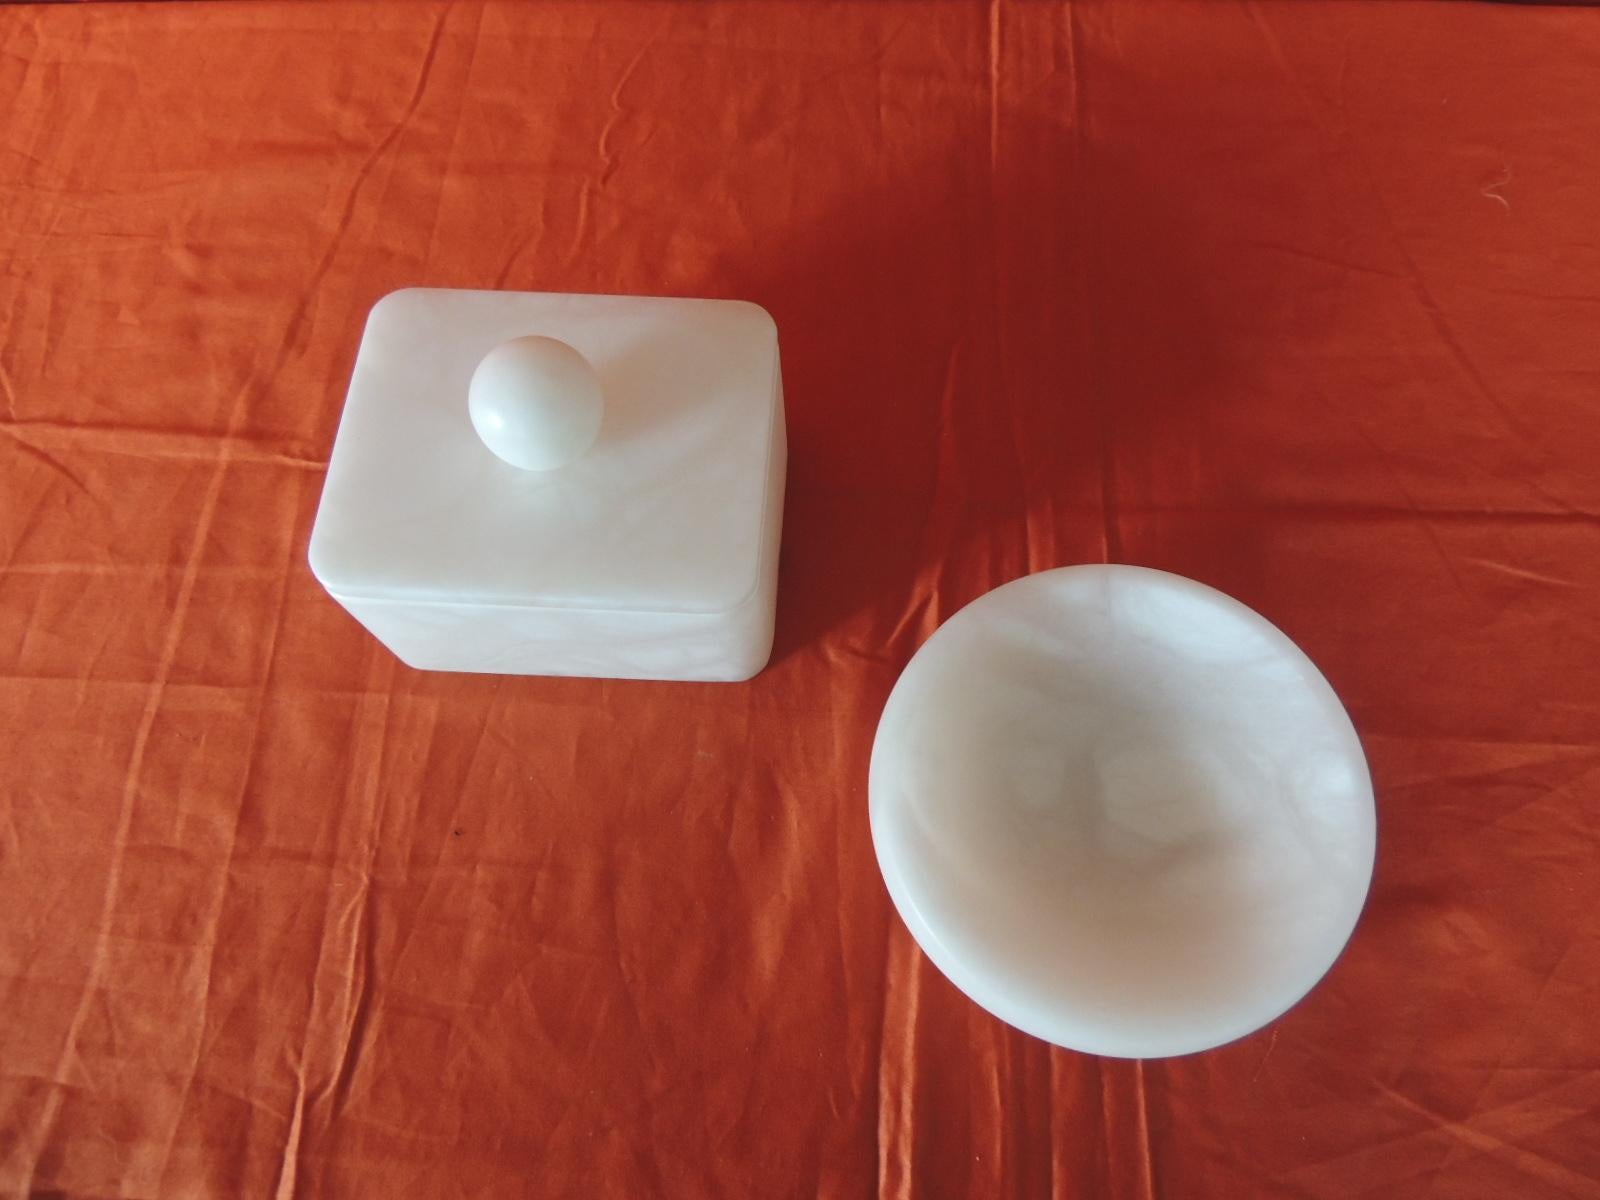 Hand carved set of covered box and round dish Italian alabaster decorative accessories.
These pieces could be use in the bathroom or on a vanity table.
